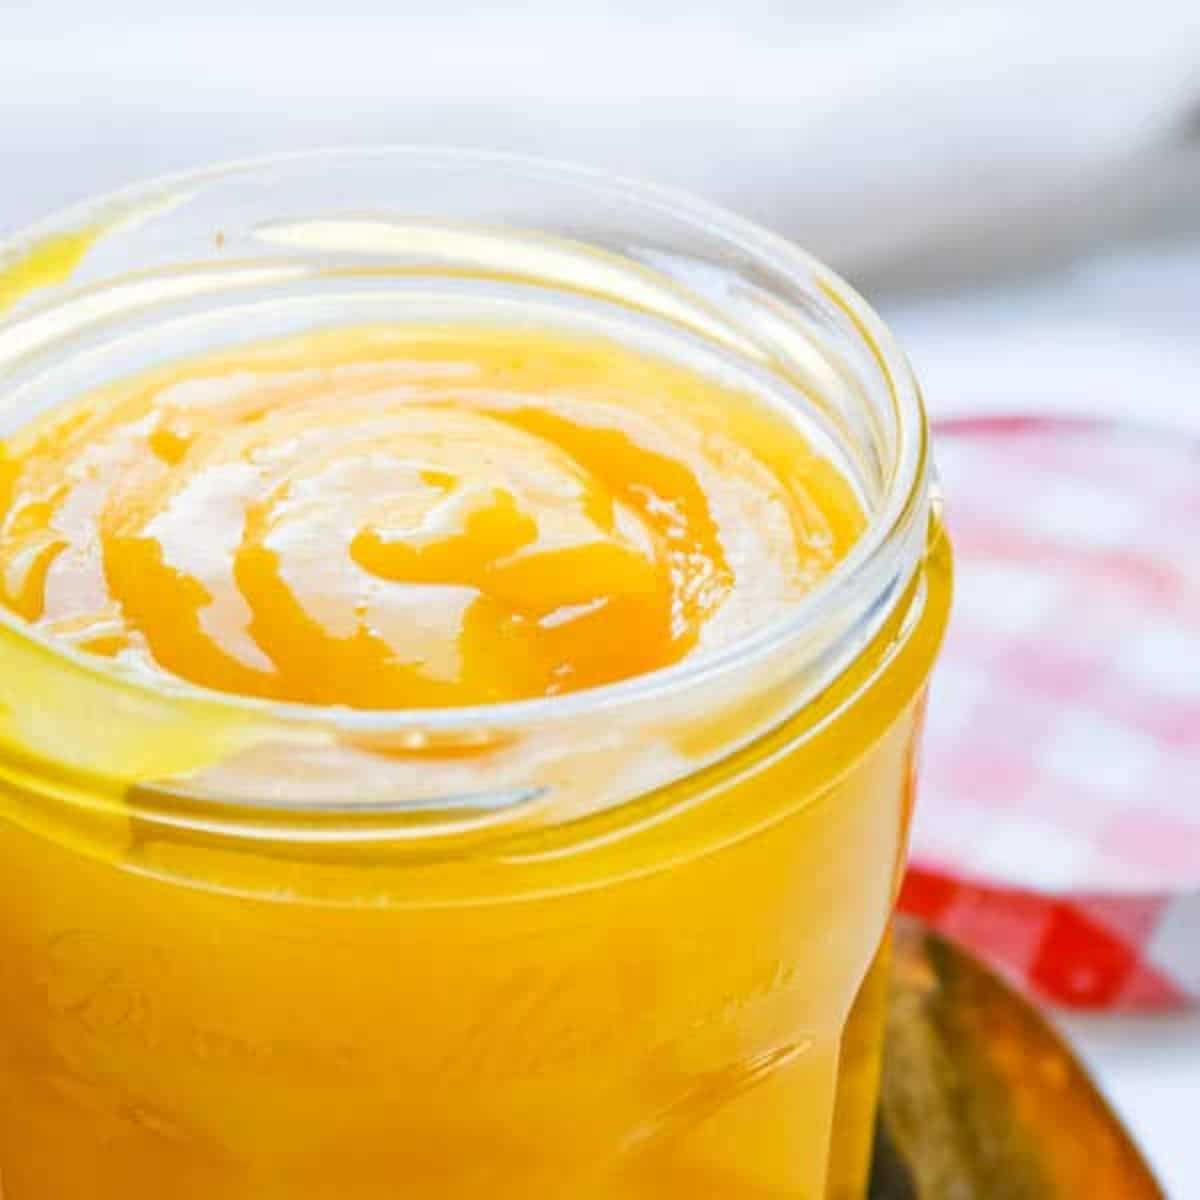 Creamy passion fruit curd in a glass jar.